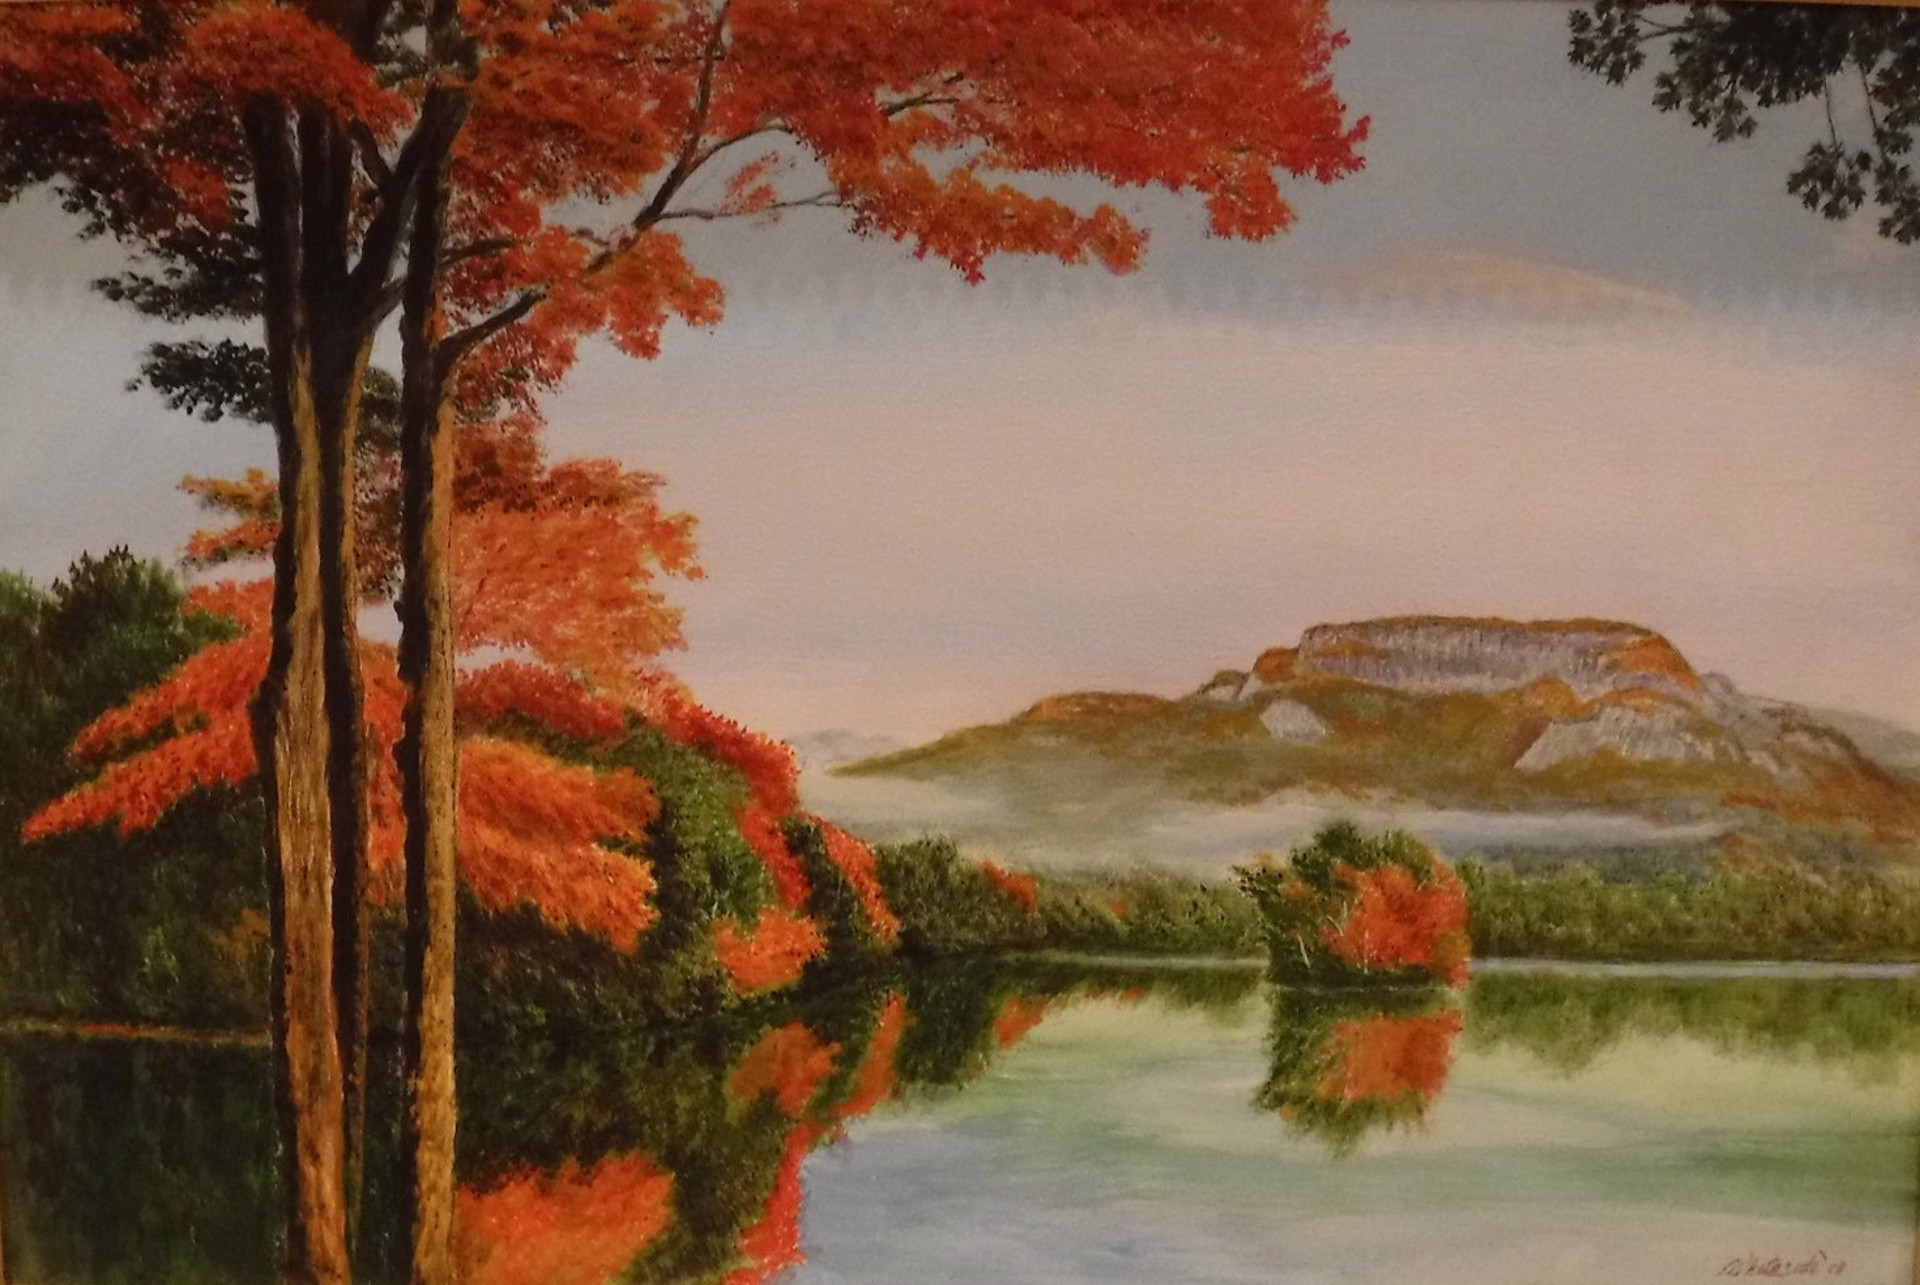 Lake View of Whiteside by William A. Whiteside